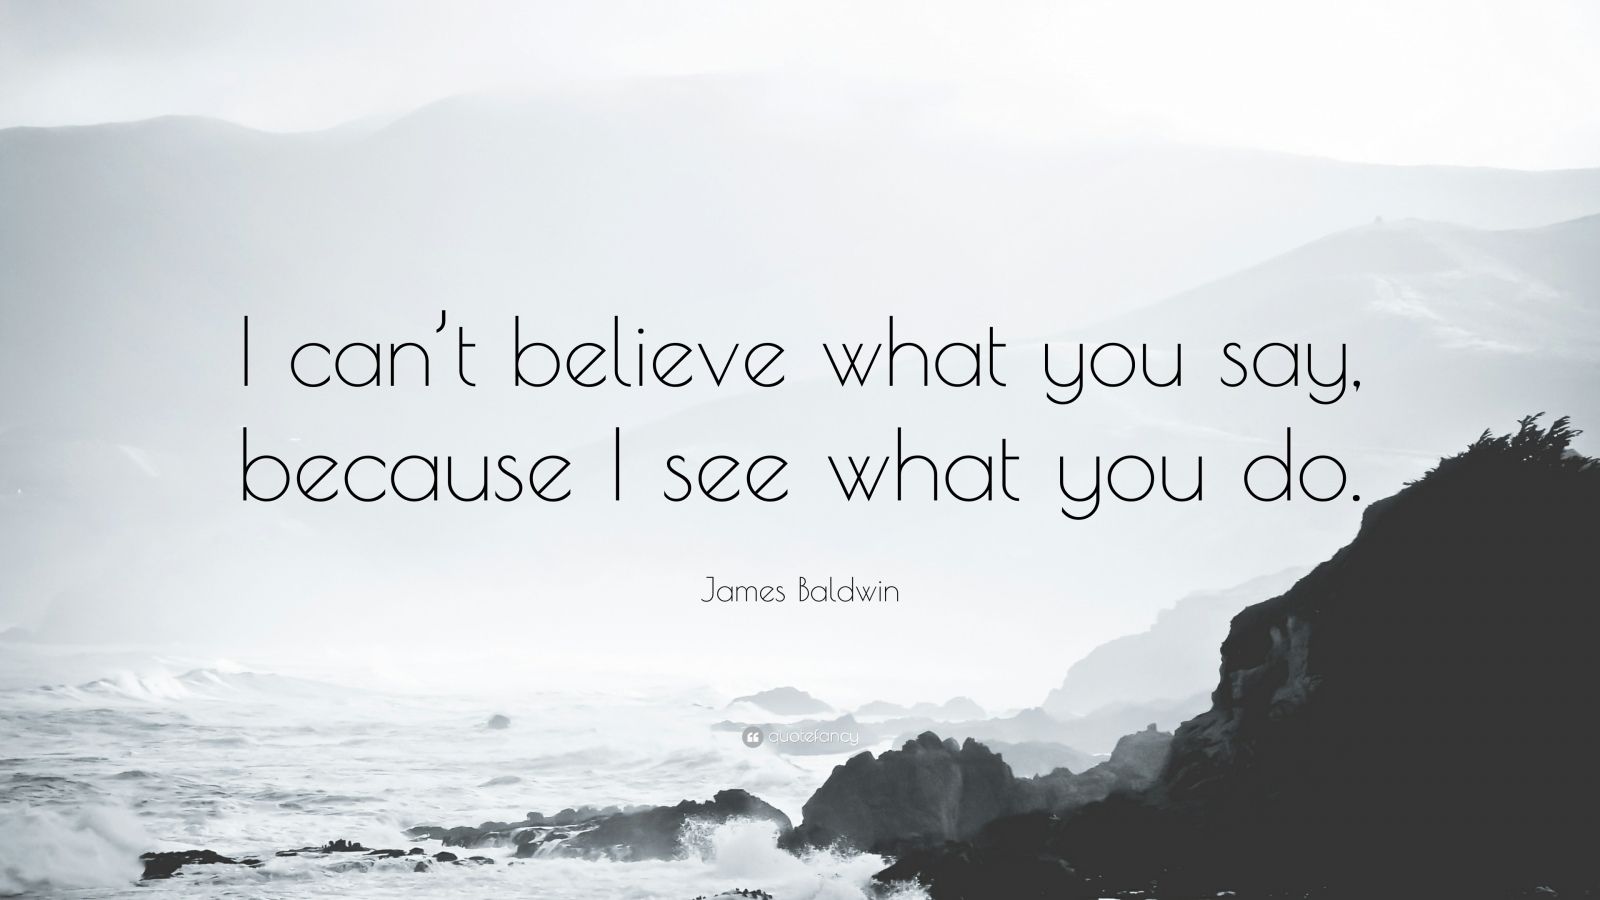 James Baldwin Quote: “I can’t believe what you say, because I see what